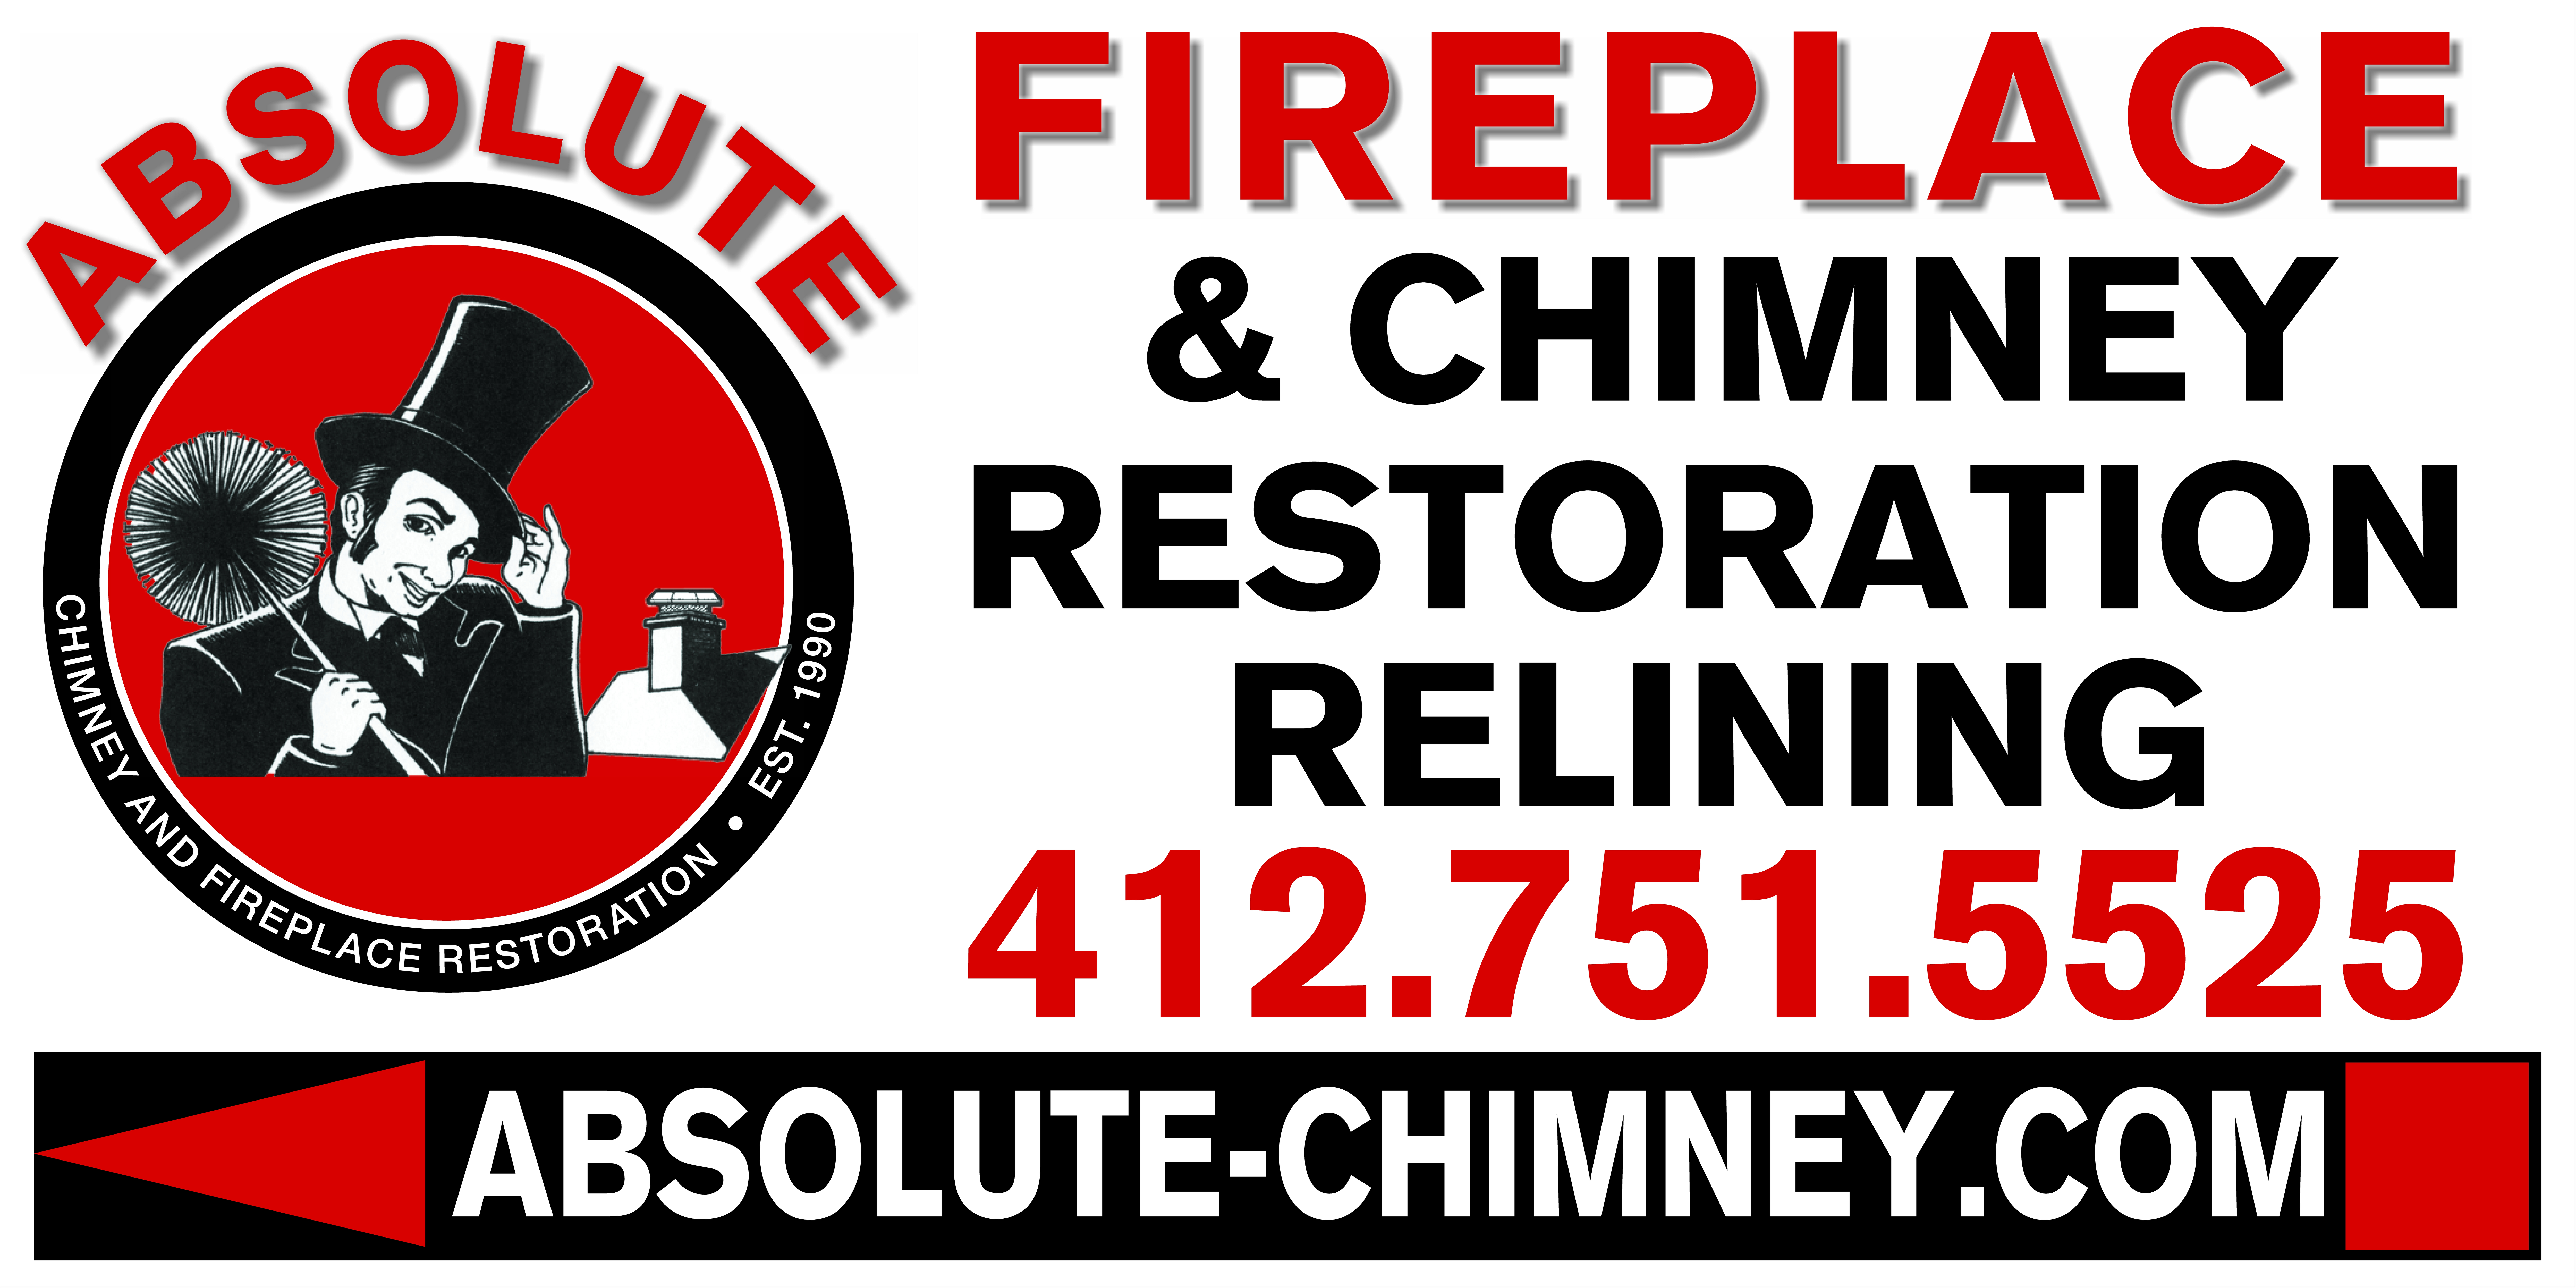 Absolute Chimney Information